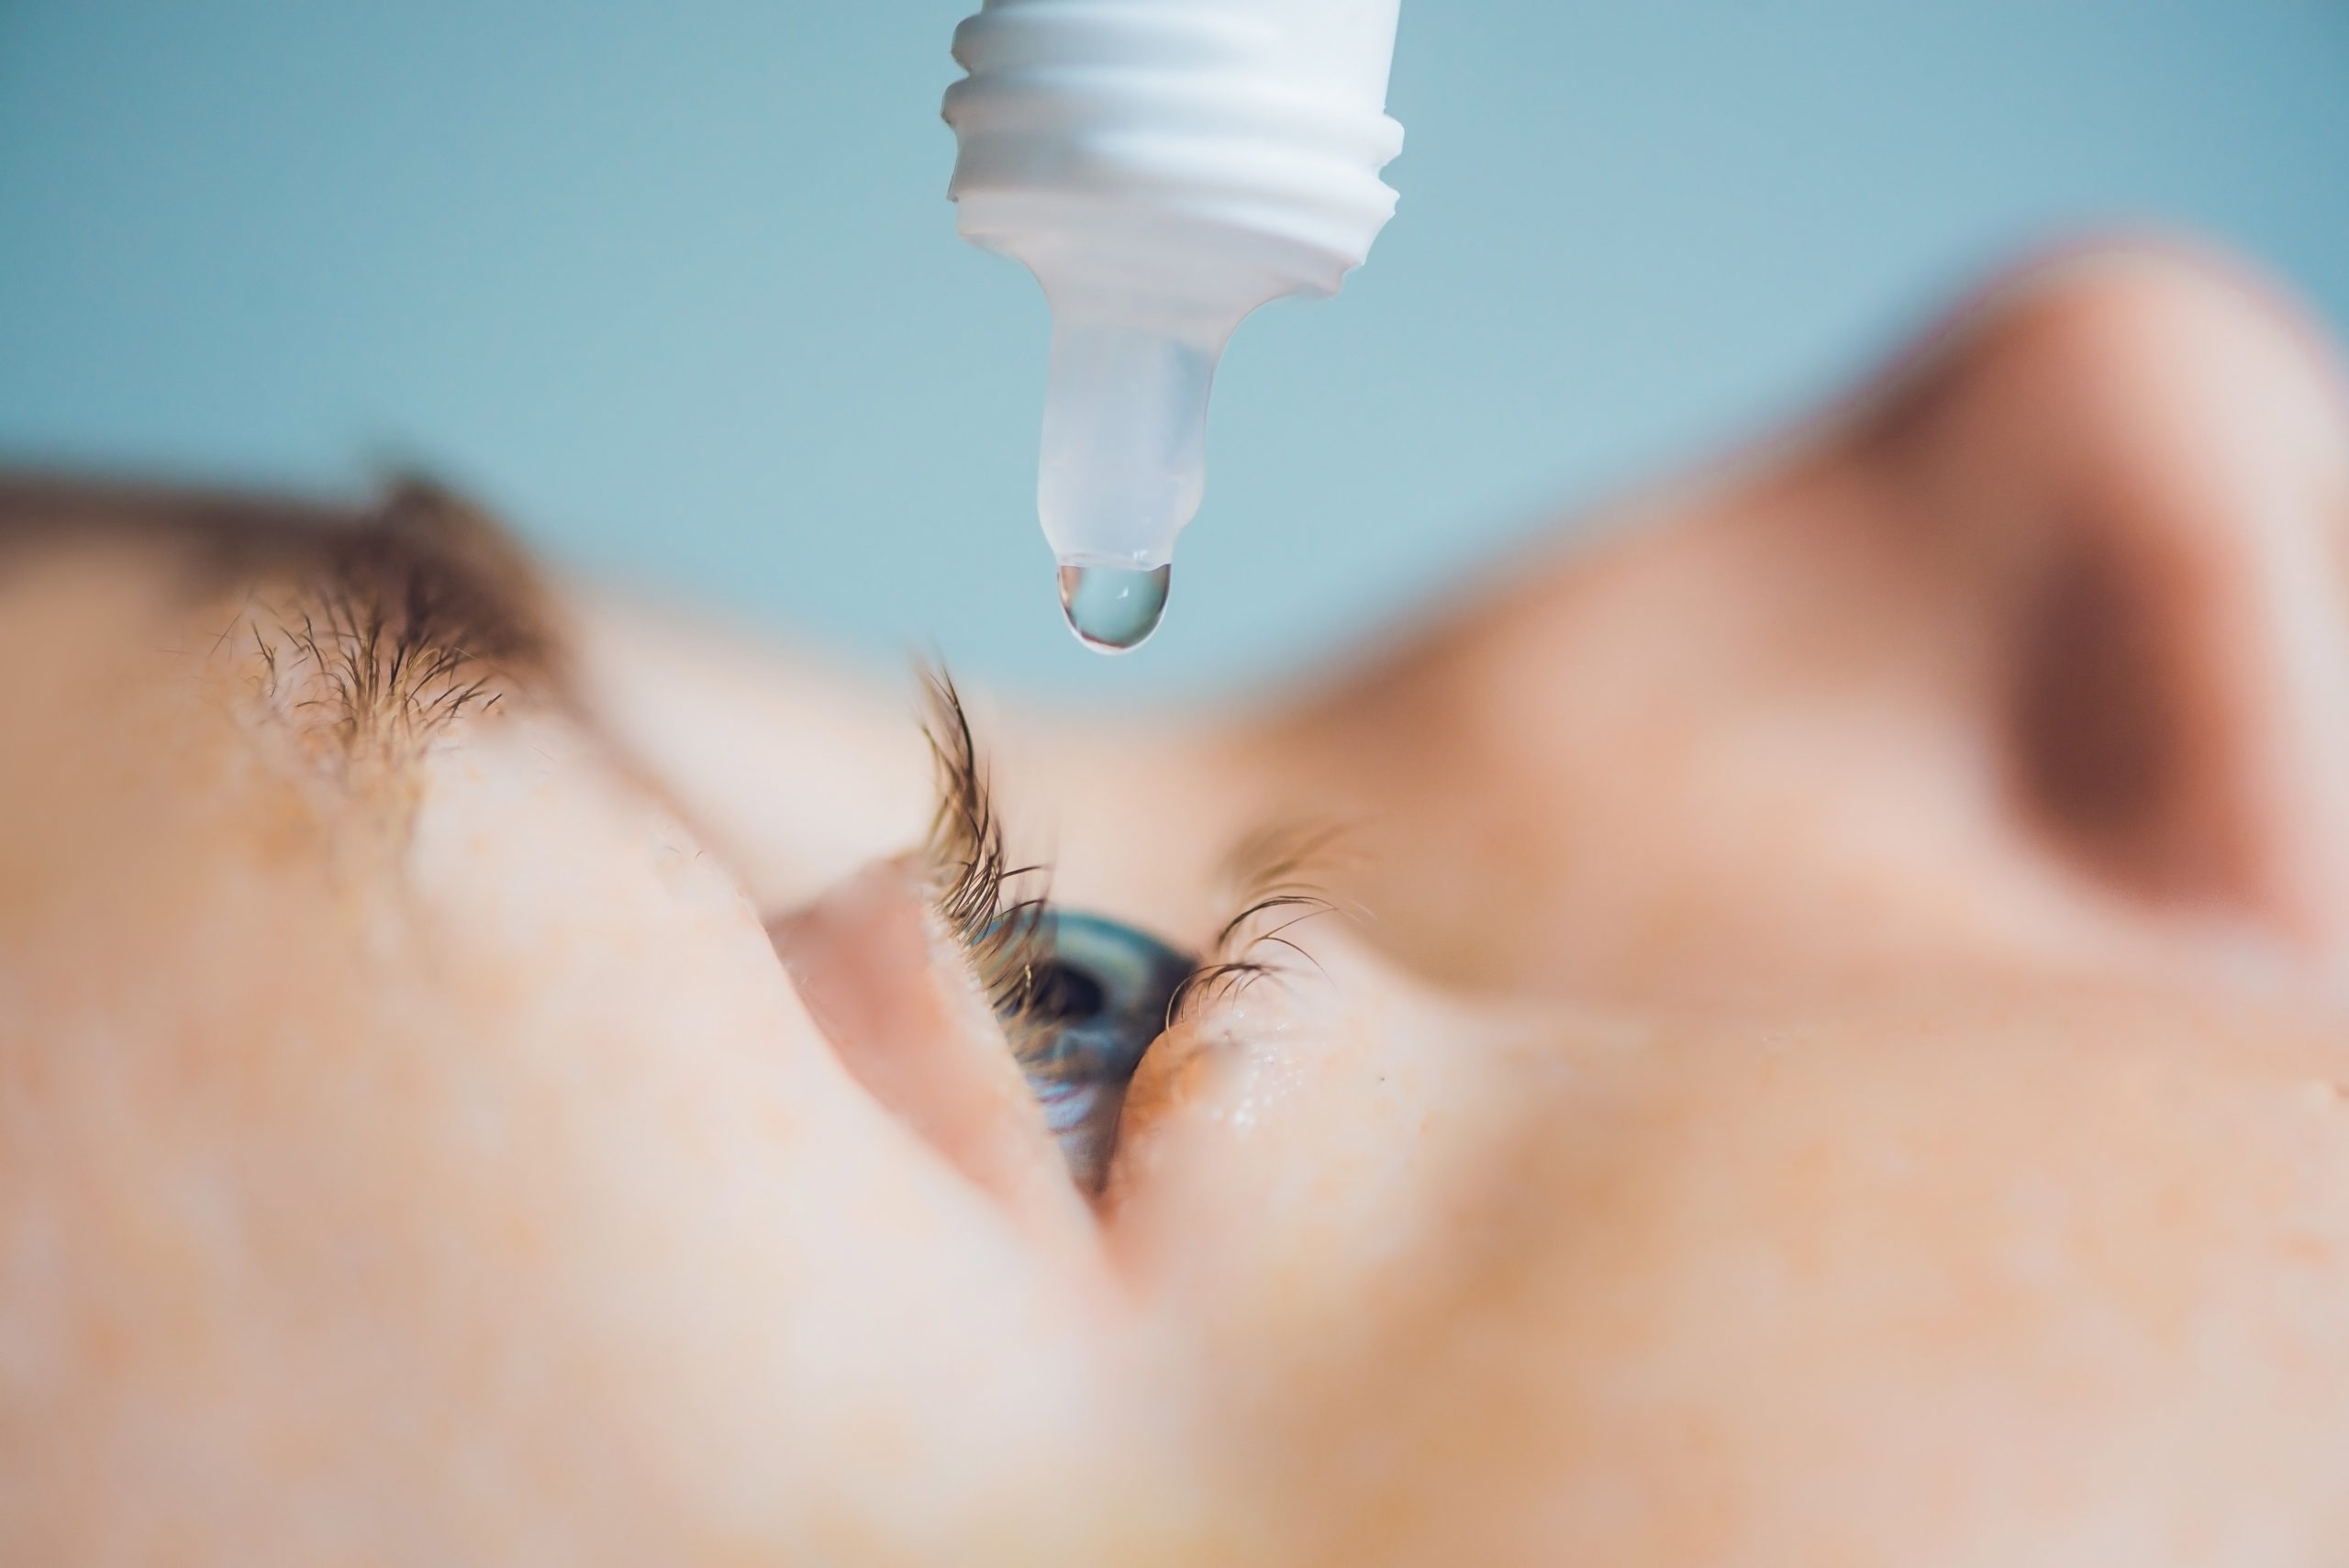 Allergies and Dry Eyes: What’s the Difference?